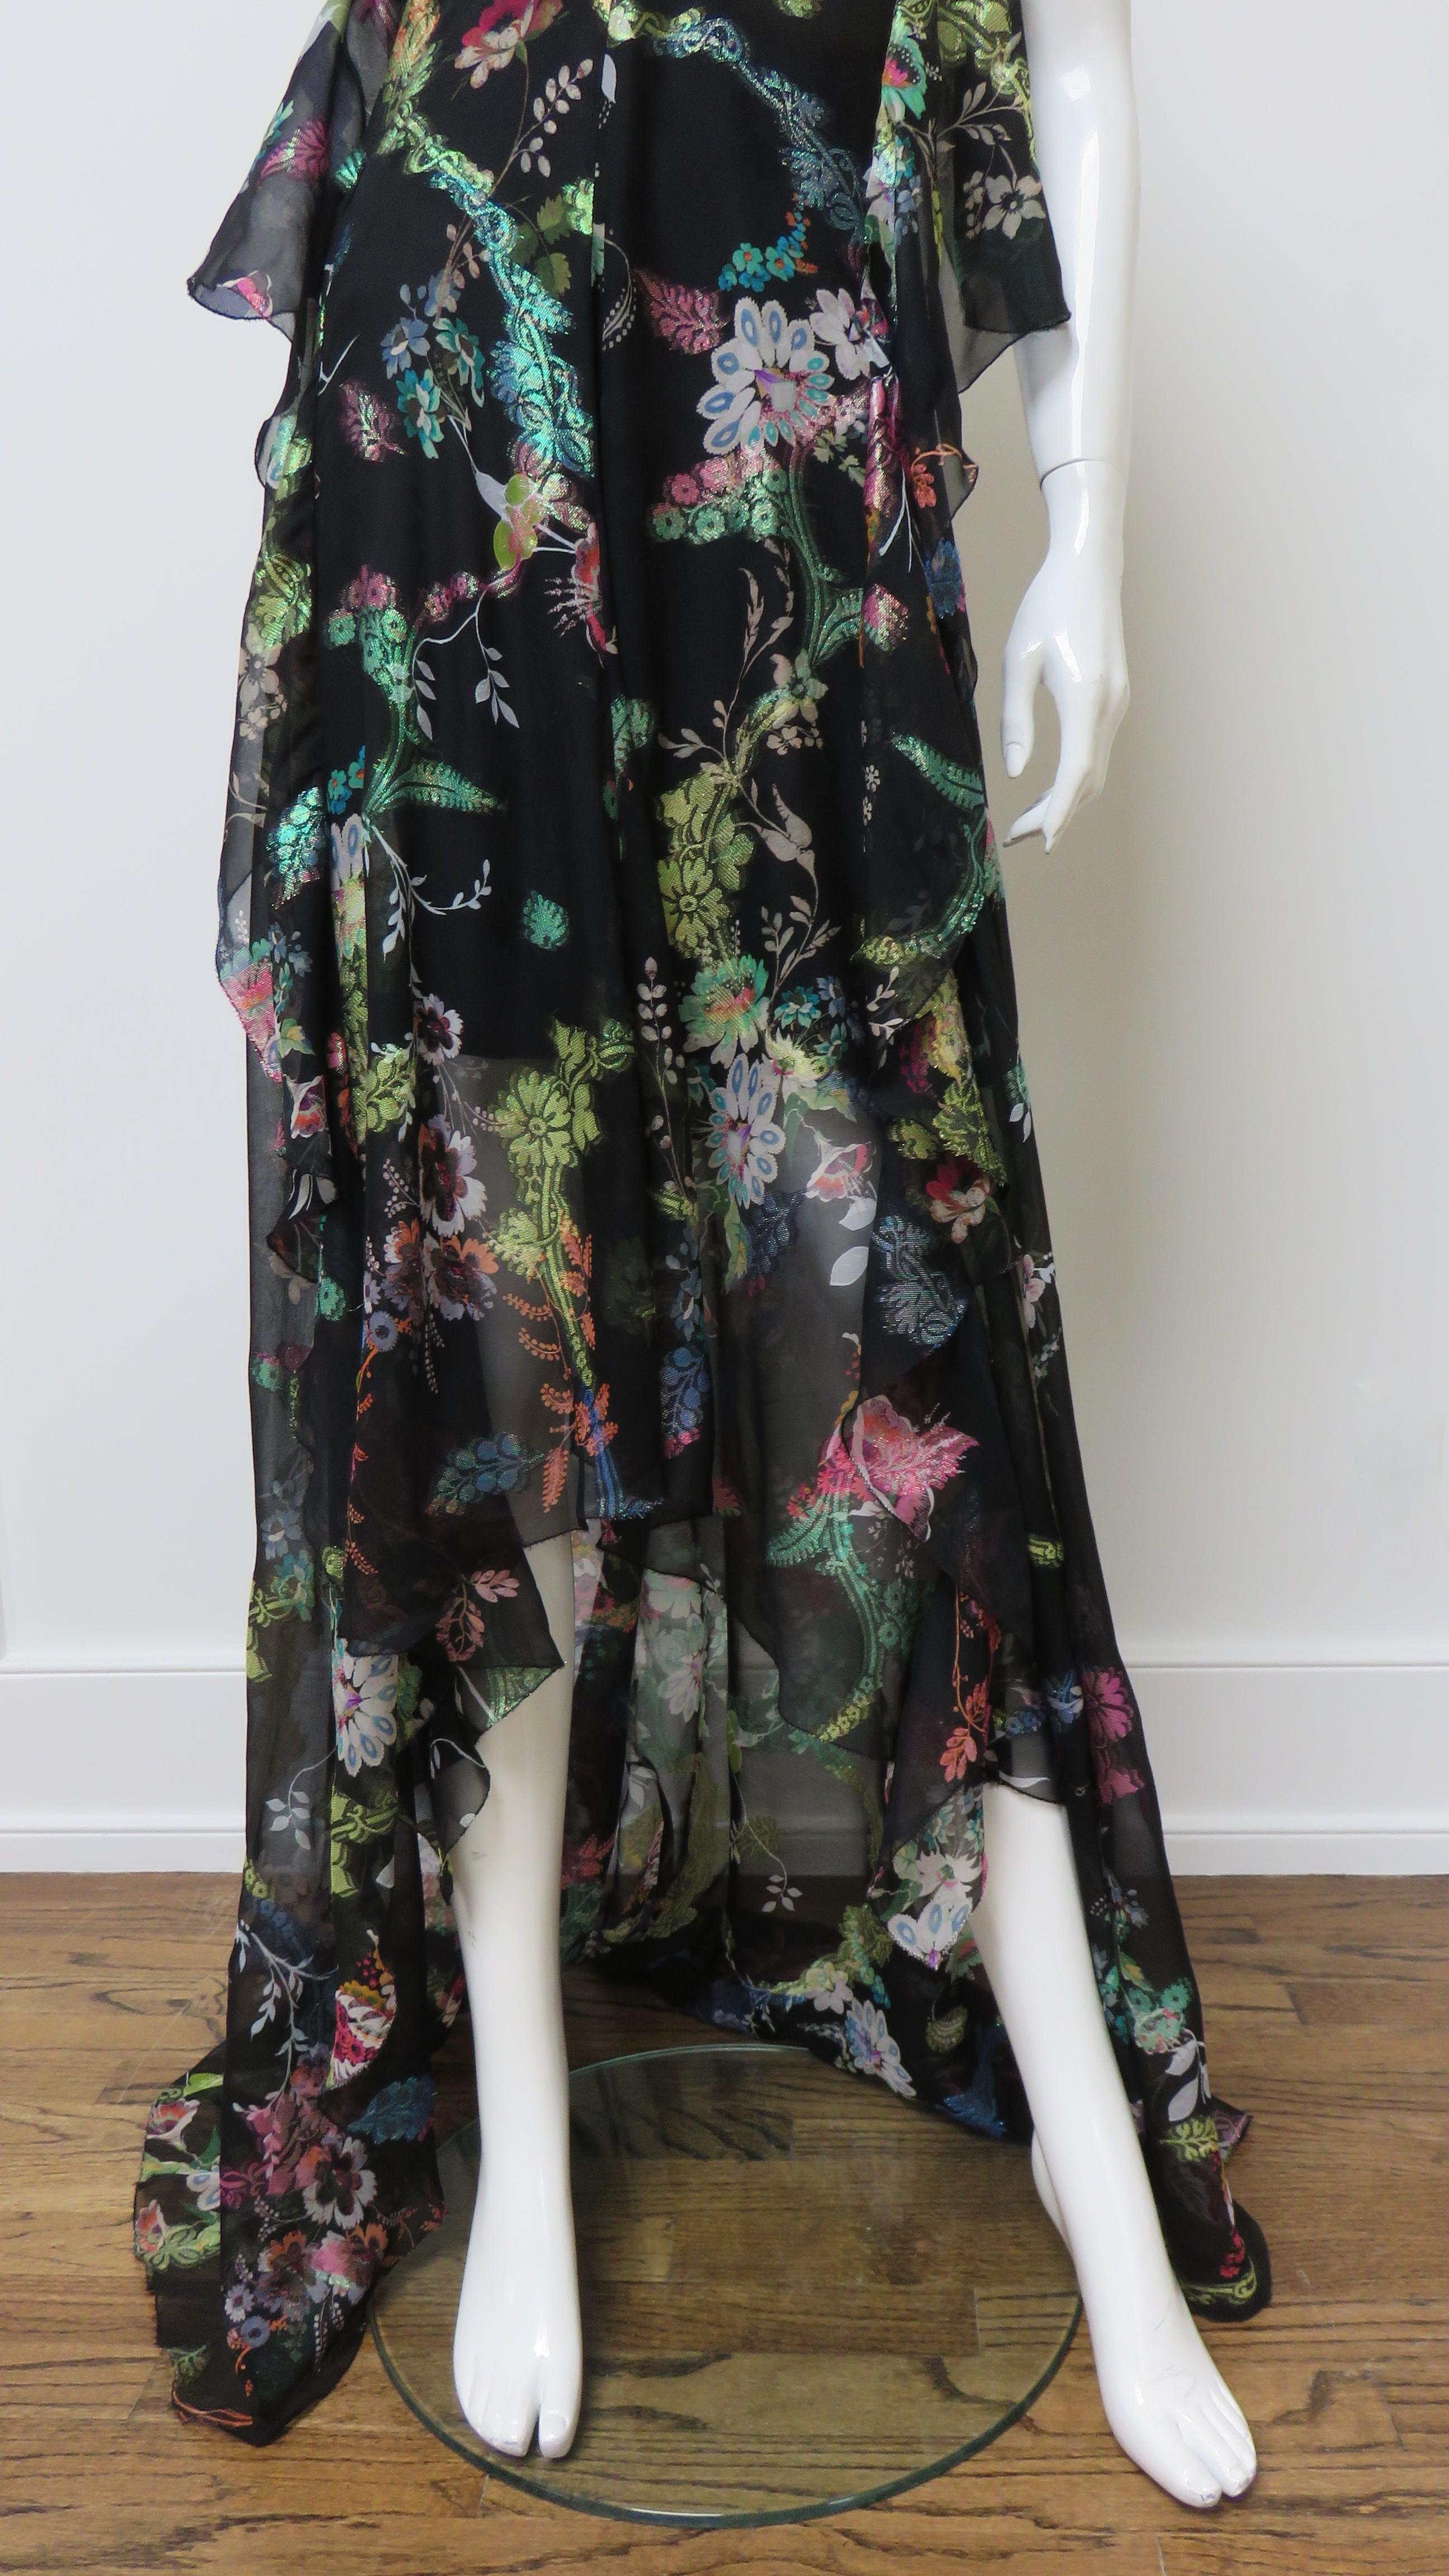 Etro New Flower Print Silk Backless Dress In New Condition For Sale In Water Mill, NY